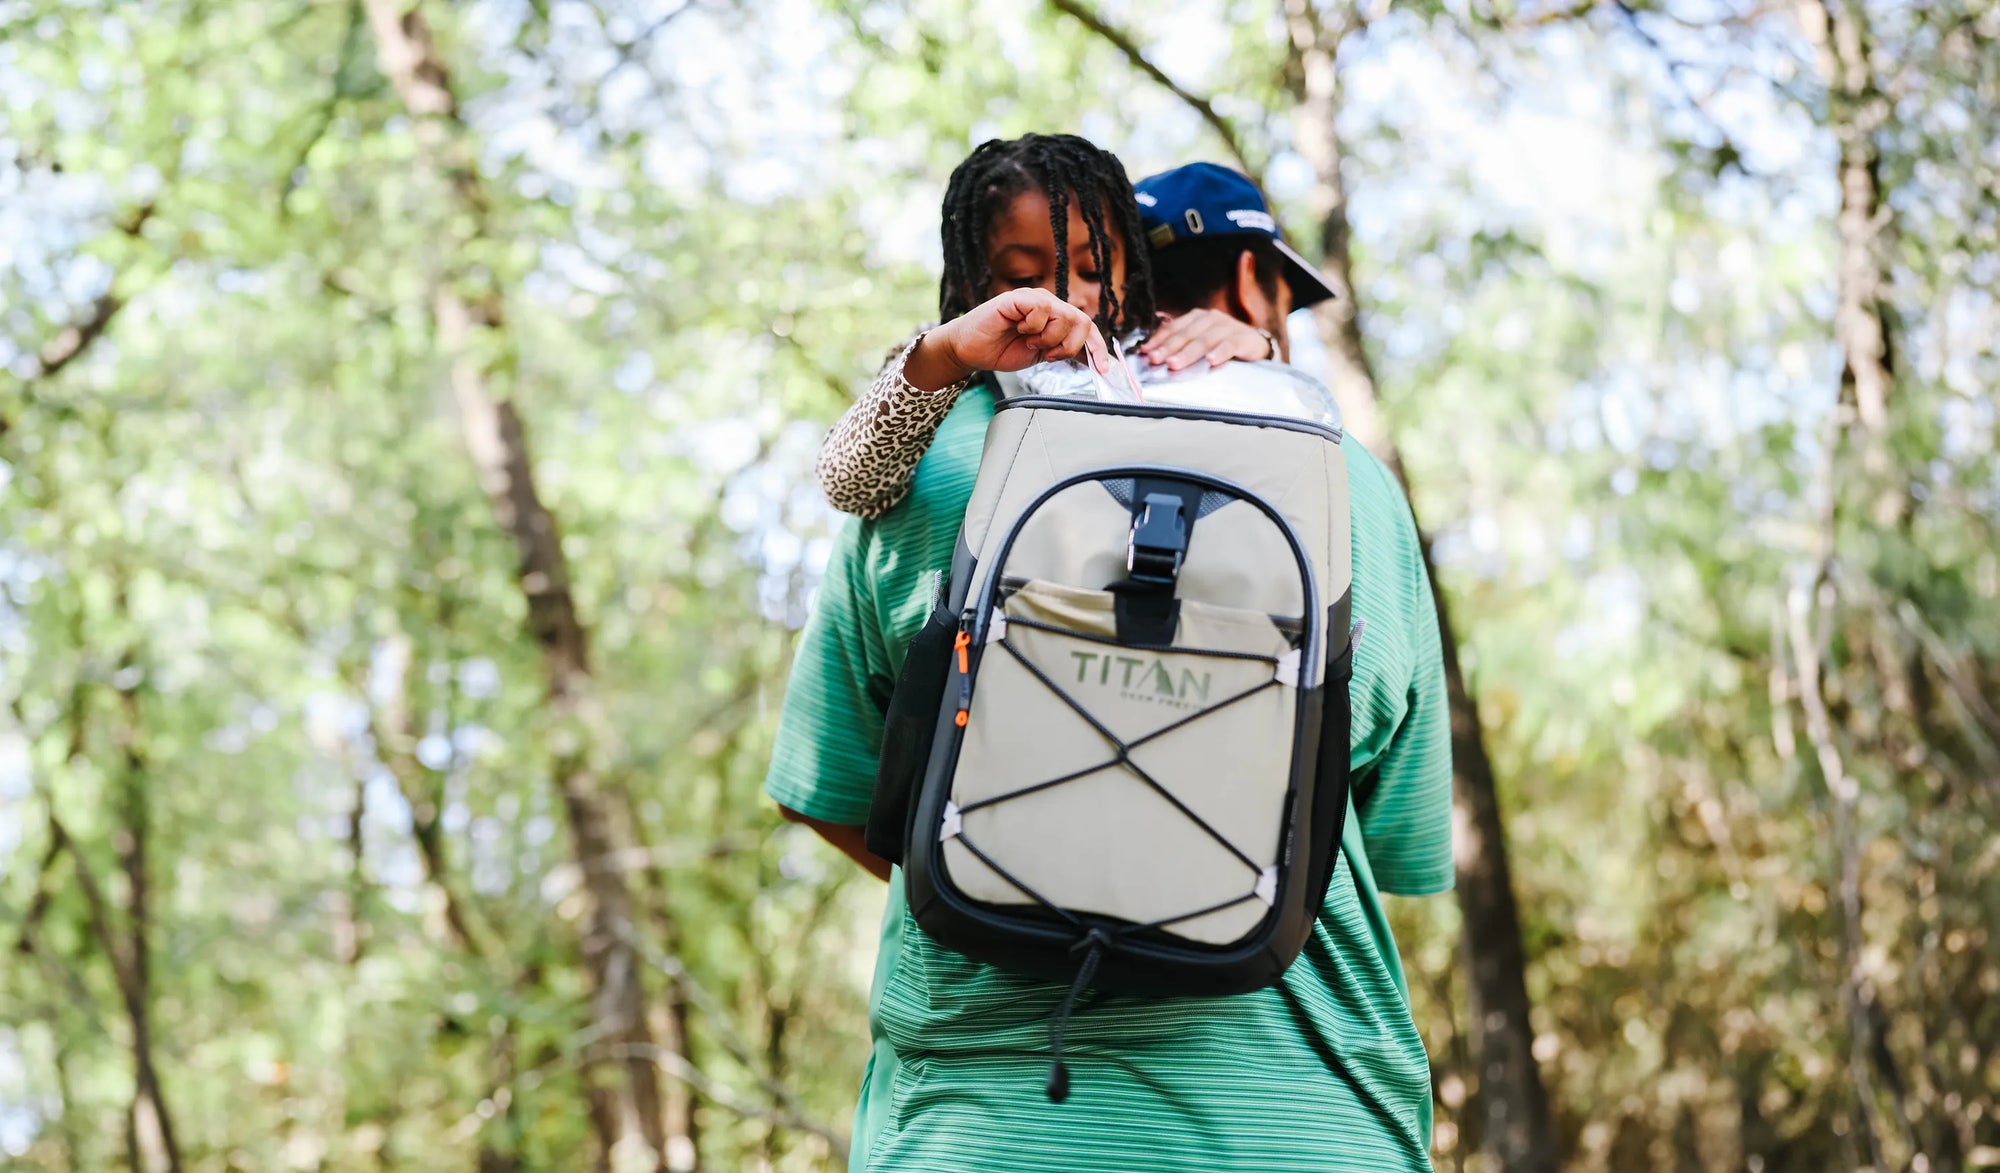 A man carrying his daughter while wearing a backpack cooler, ready for an outdoor adventure together.